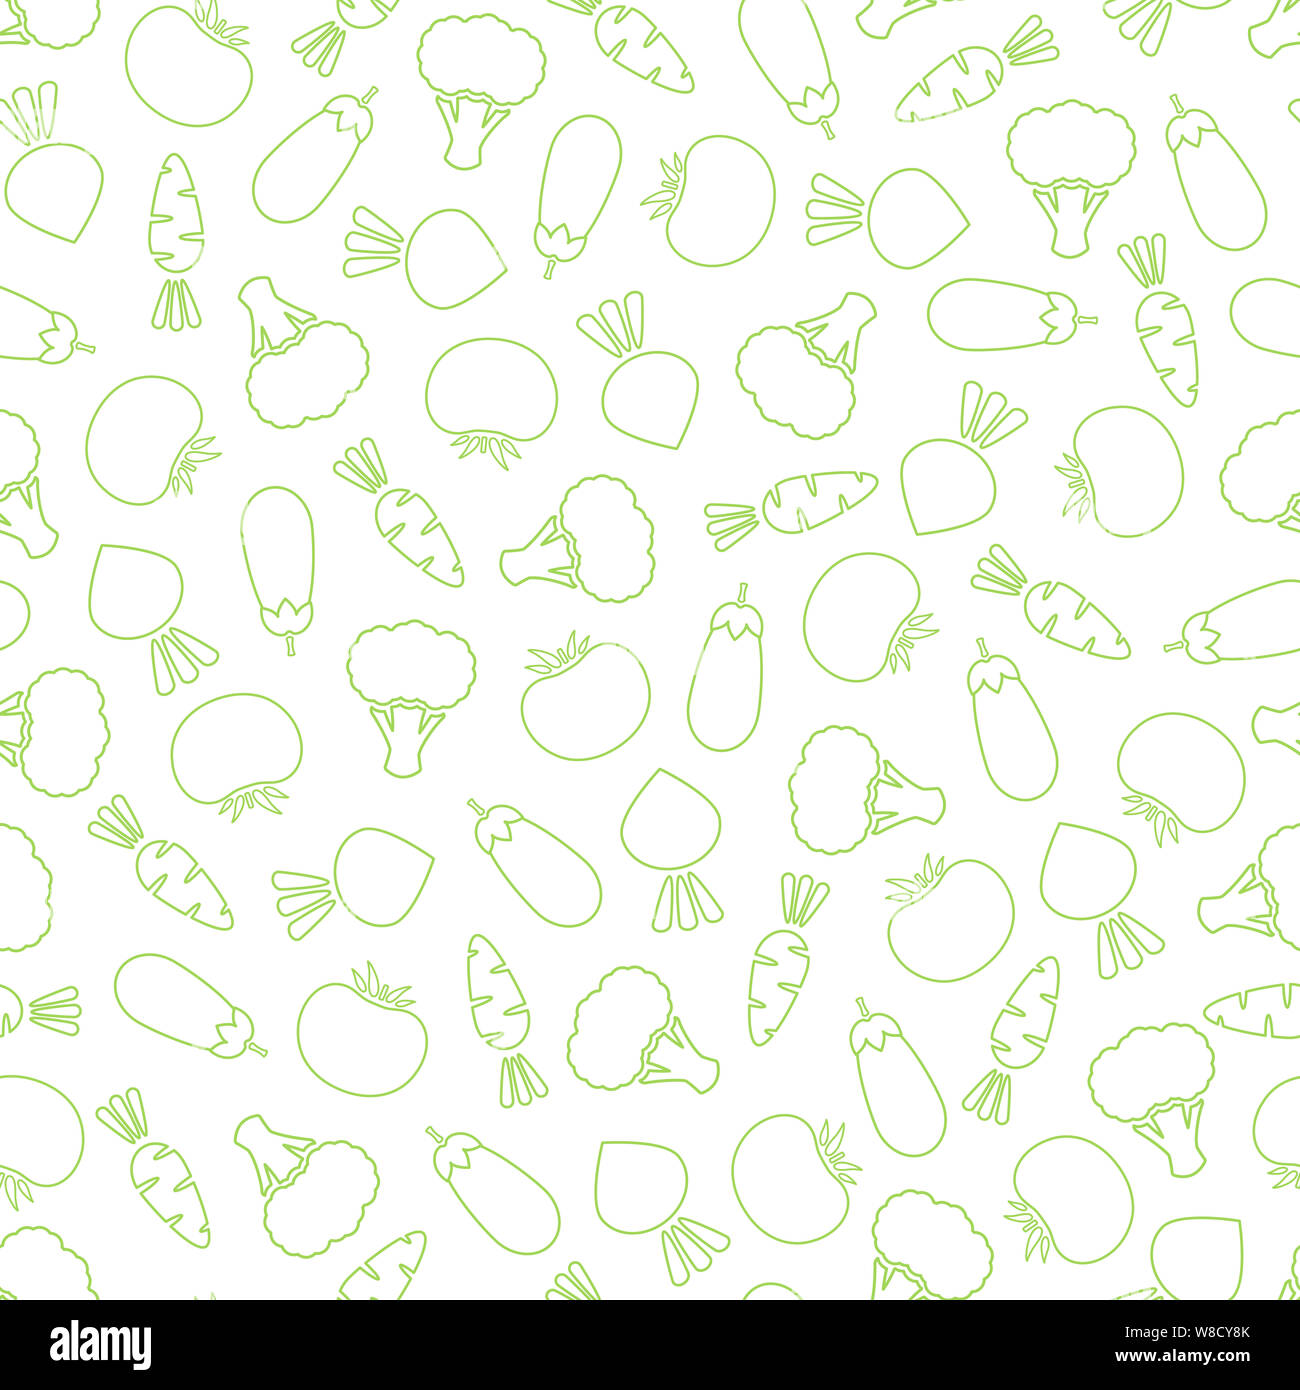 Outline seamless vegetable background flat illustration. Fresh food background in green and white colors with line silhouette vegetable seamless element for healthy diet decor or wallpaper Stock Photo